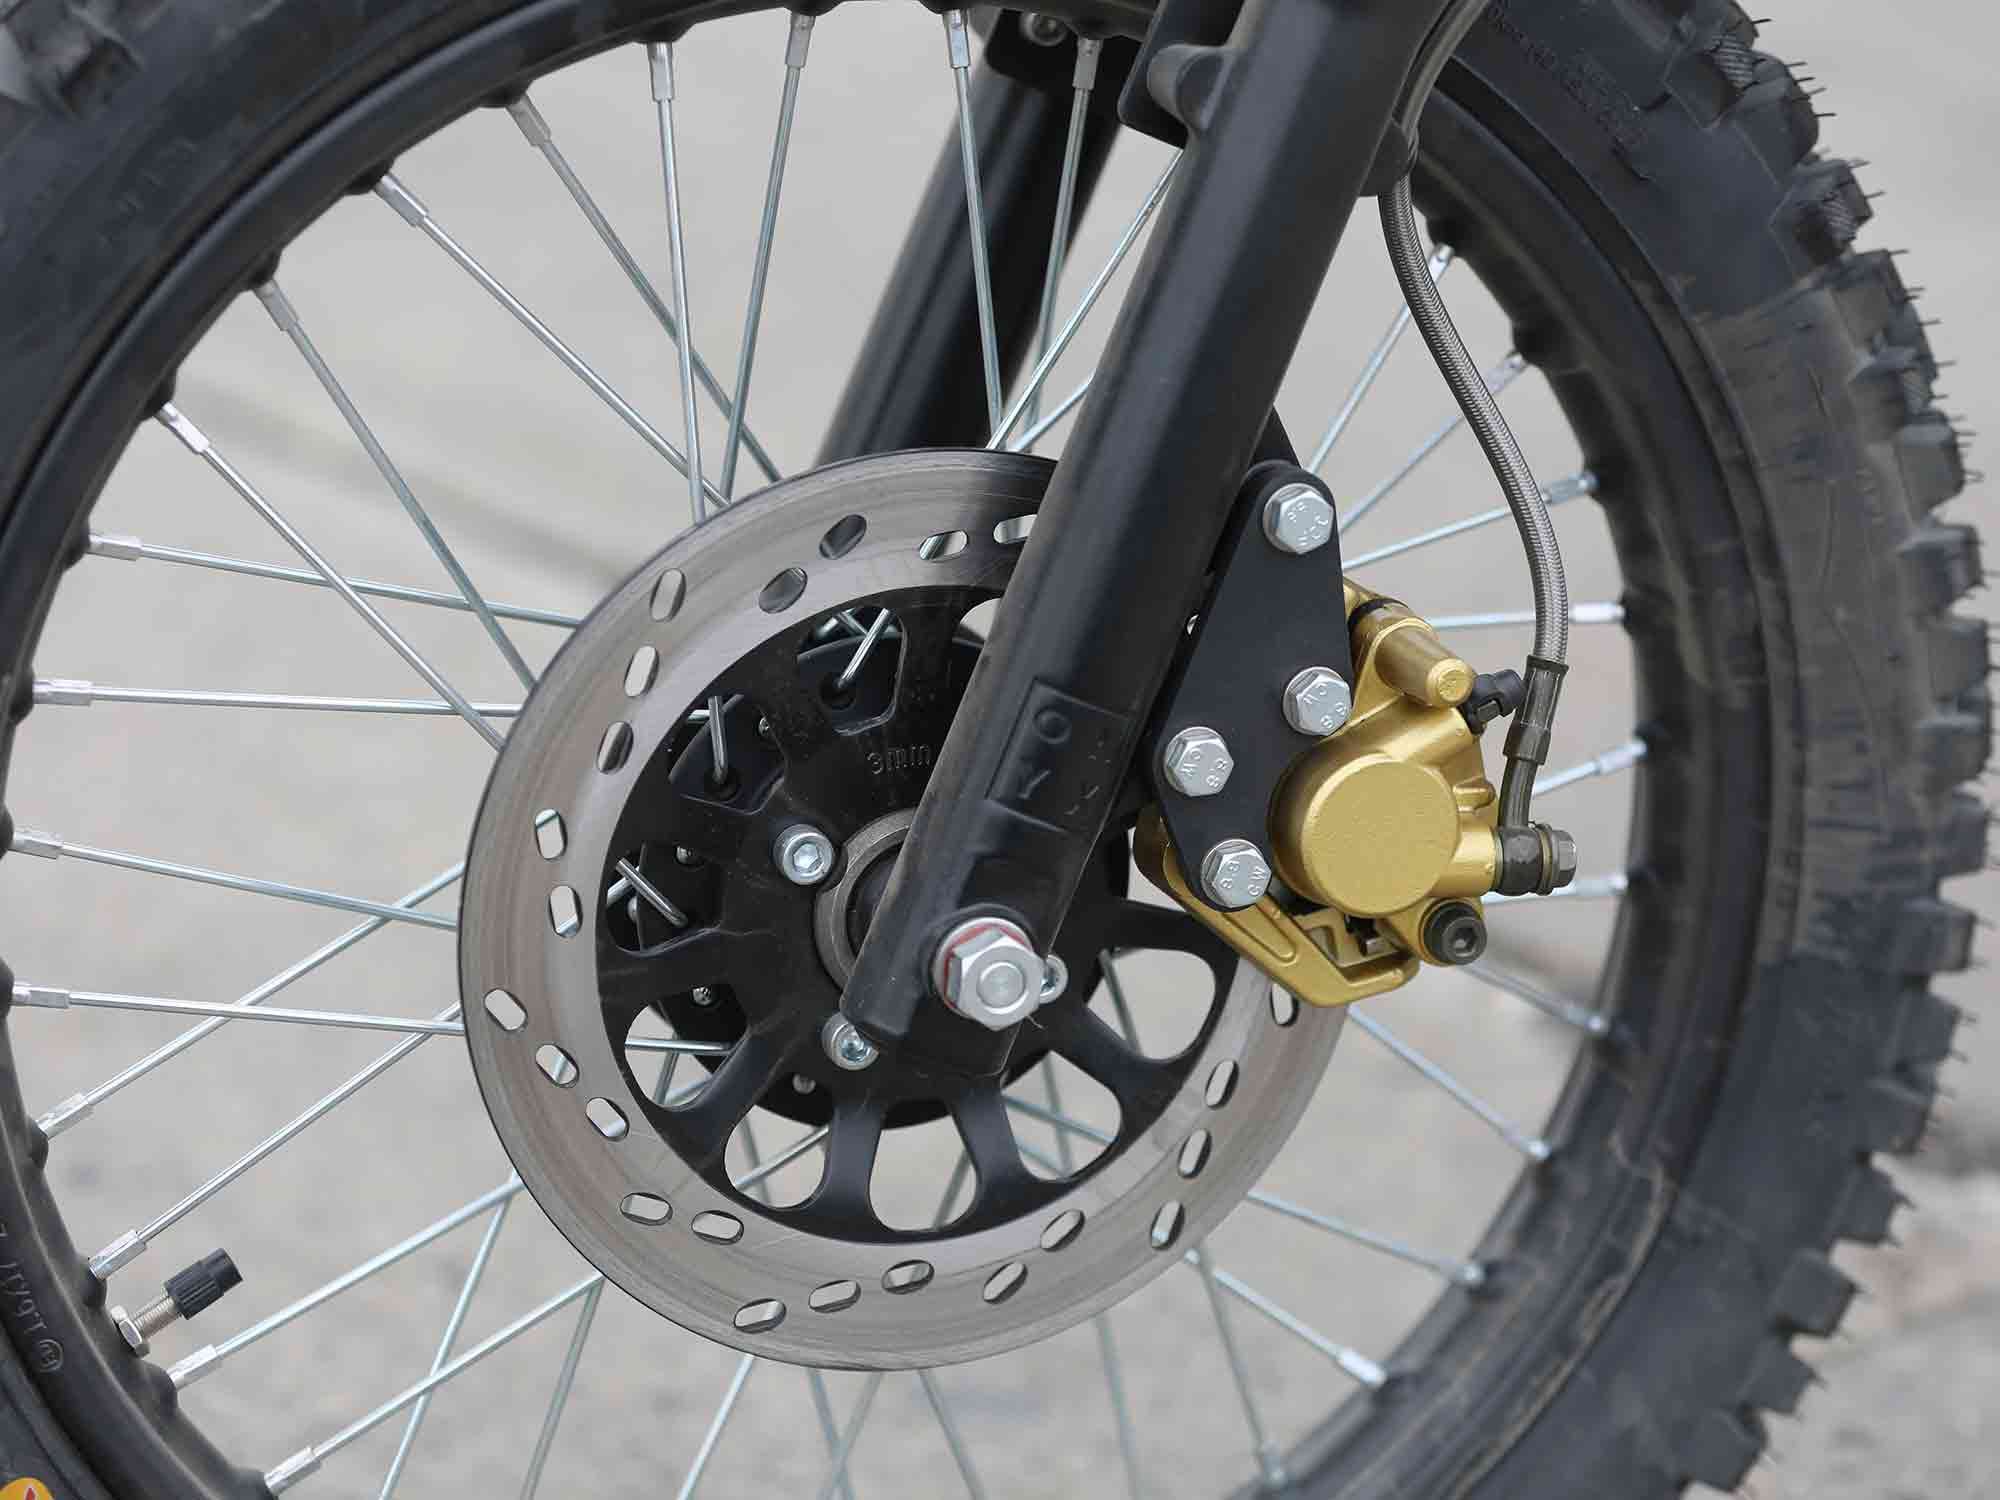 A hydraulic single-piston caliper on a 220mm disc serves as the RCR’s primary stopping method.